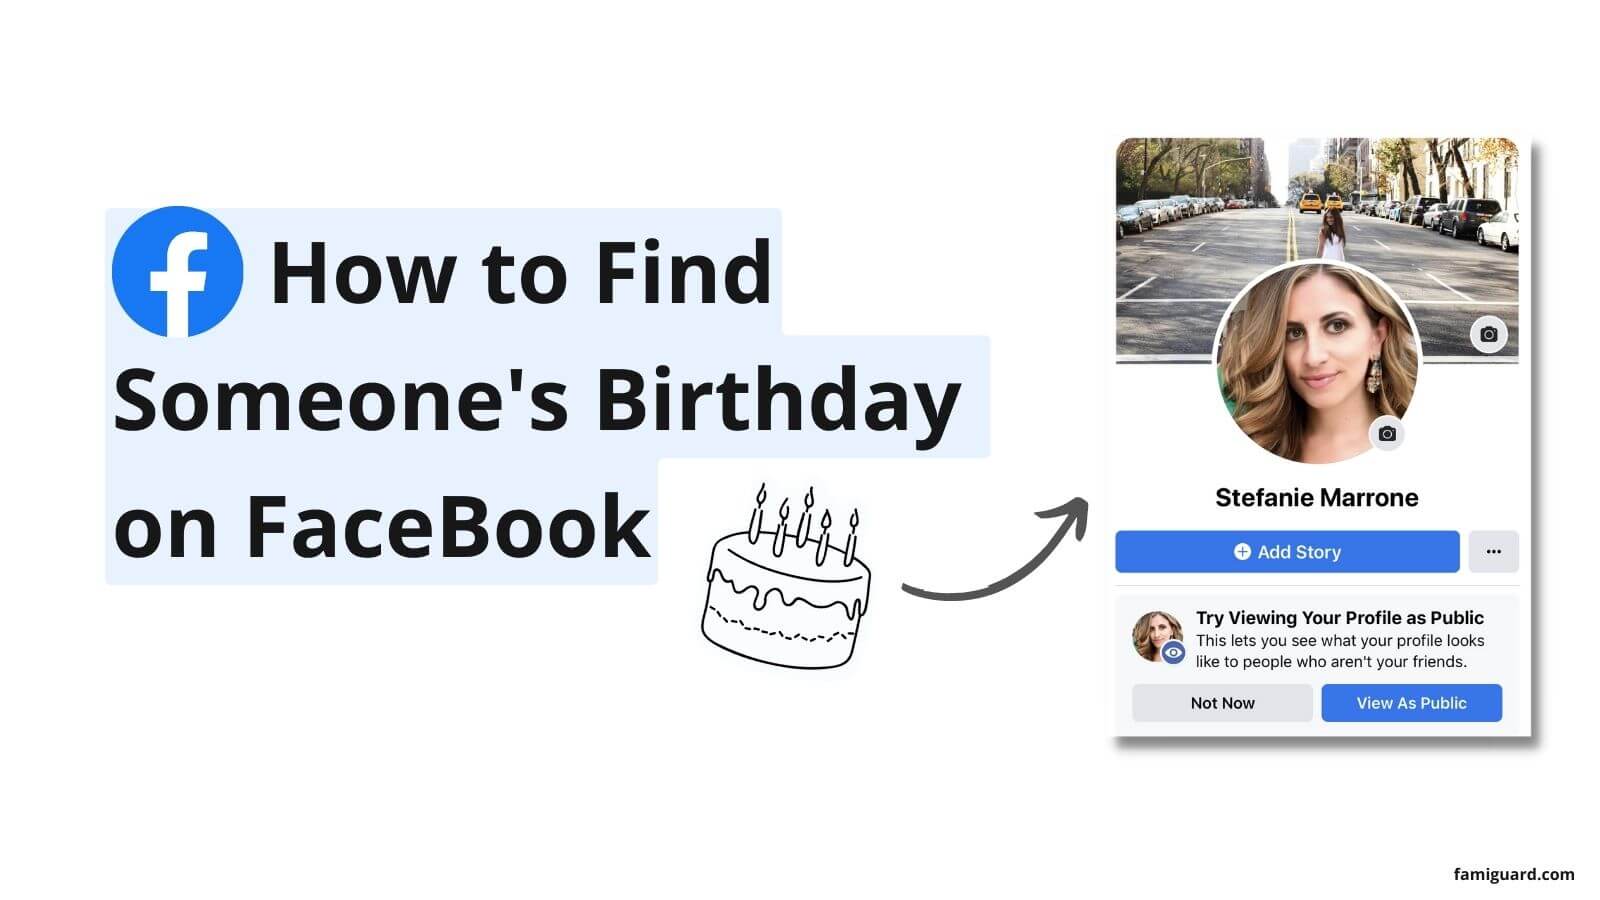 How to Find Someone's Birthday on Facebook